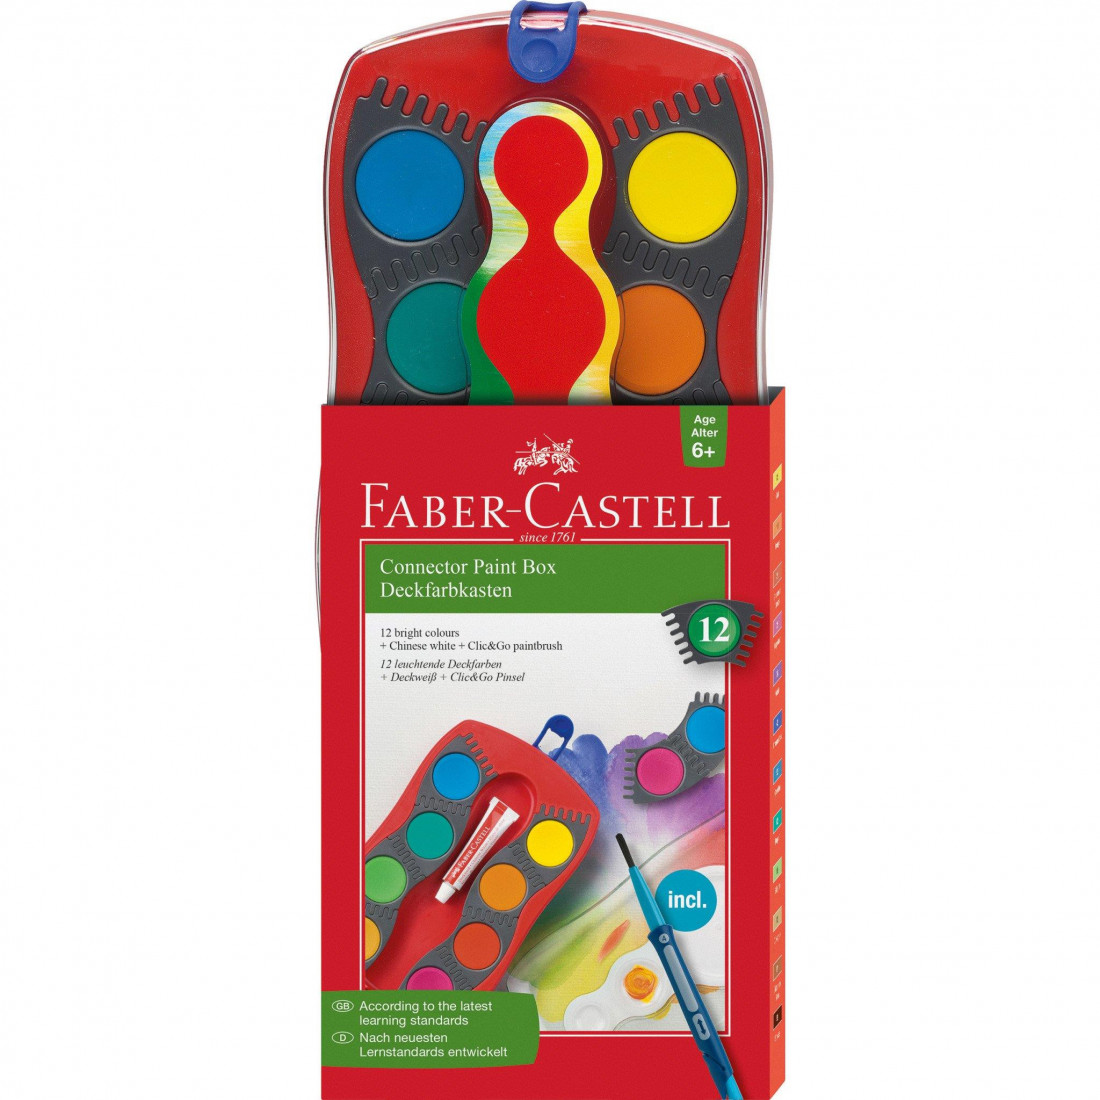 Faber Castell Connector Paint Box (νερομπογιές)- 12 Colors 125023